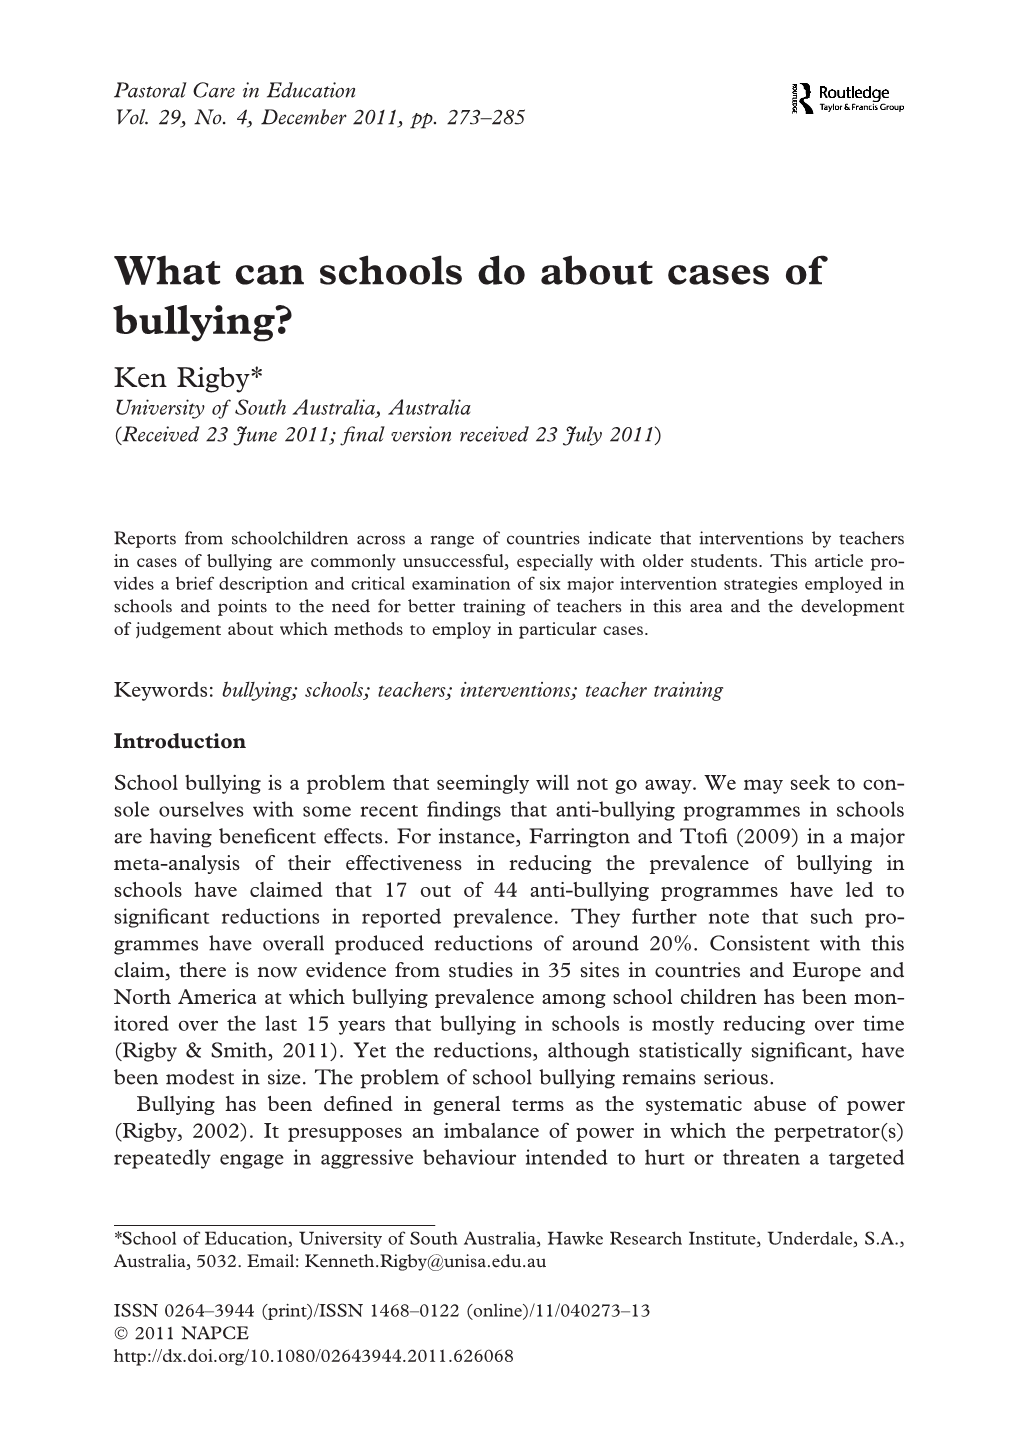 What Can Schools Do About Cases of Bullying? Ken Rigby* University of South Australia, Australia (Received 23 June 2011; ﬁnal Version Received 23 July 2011)